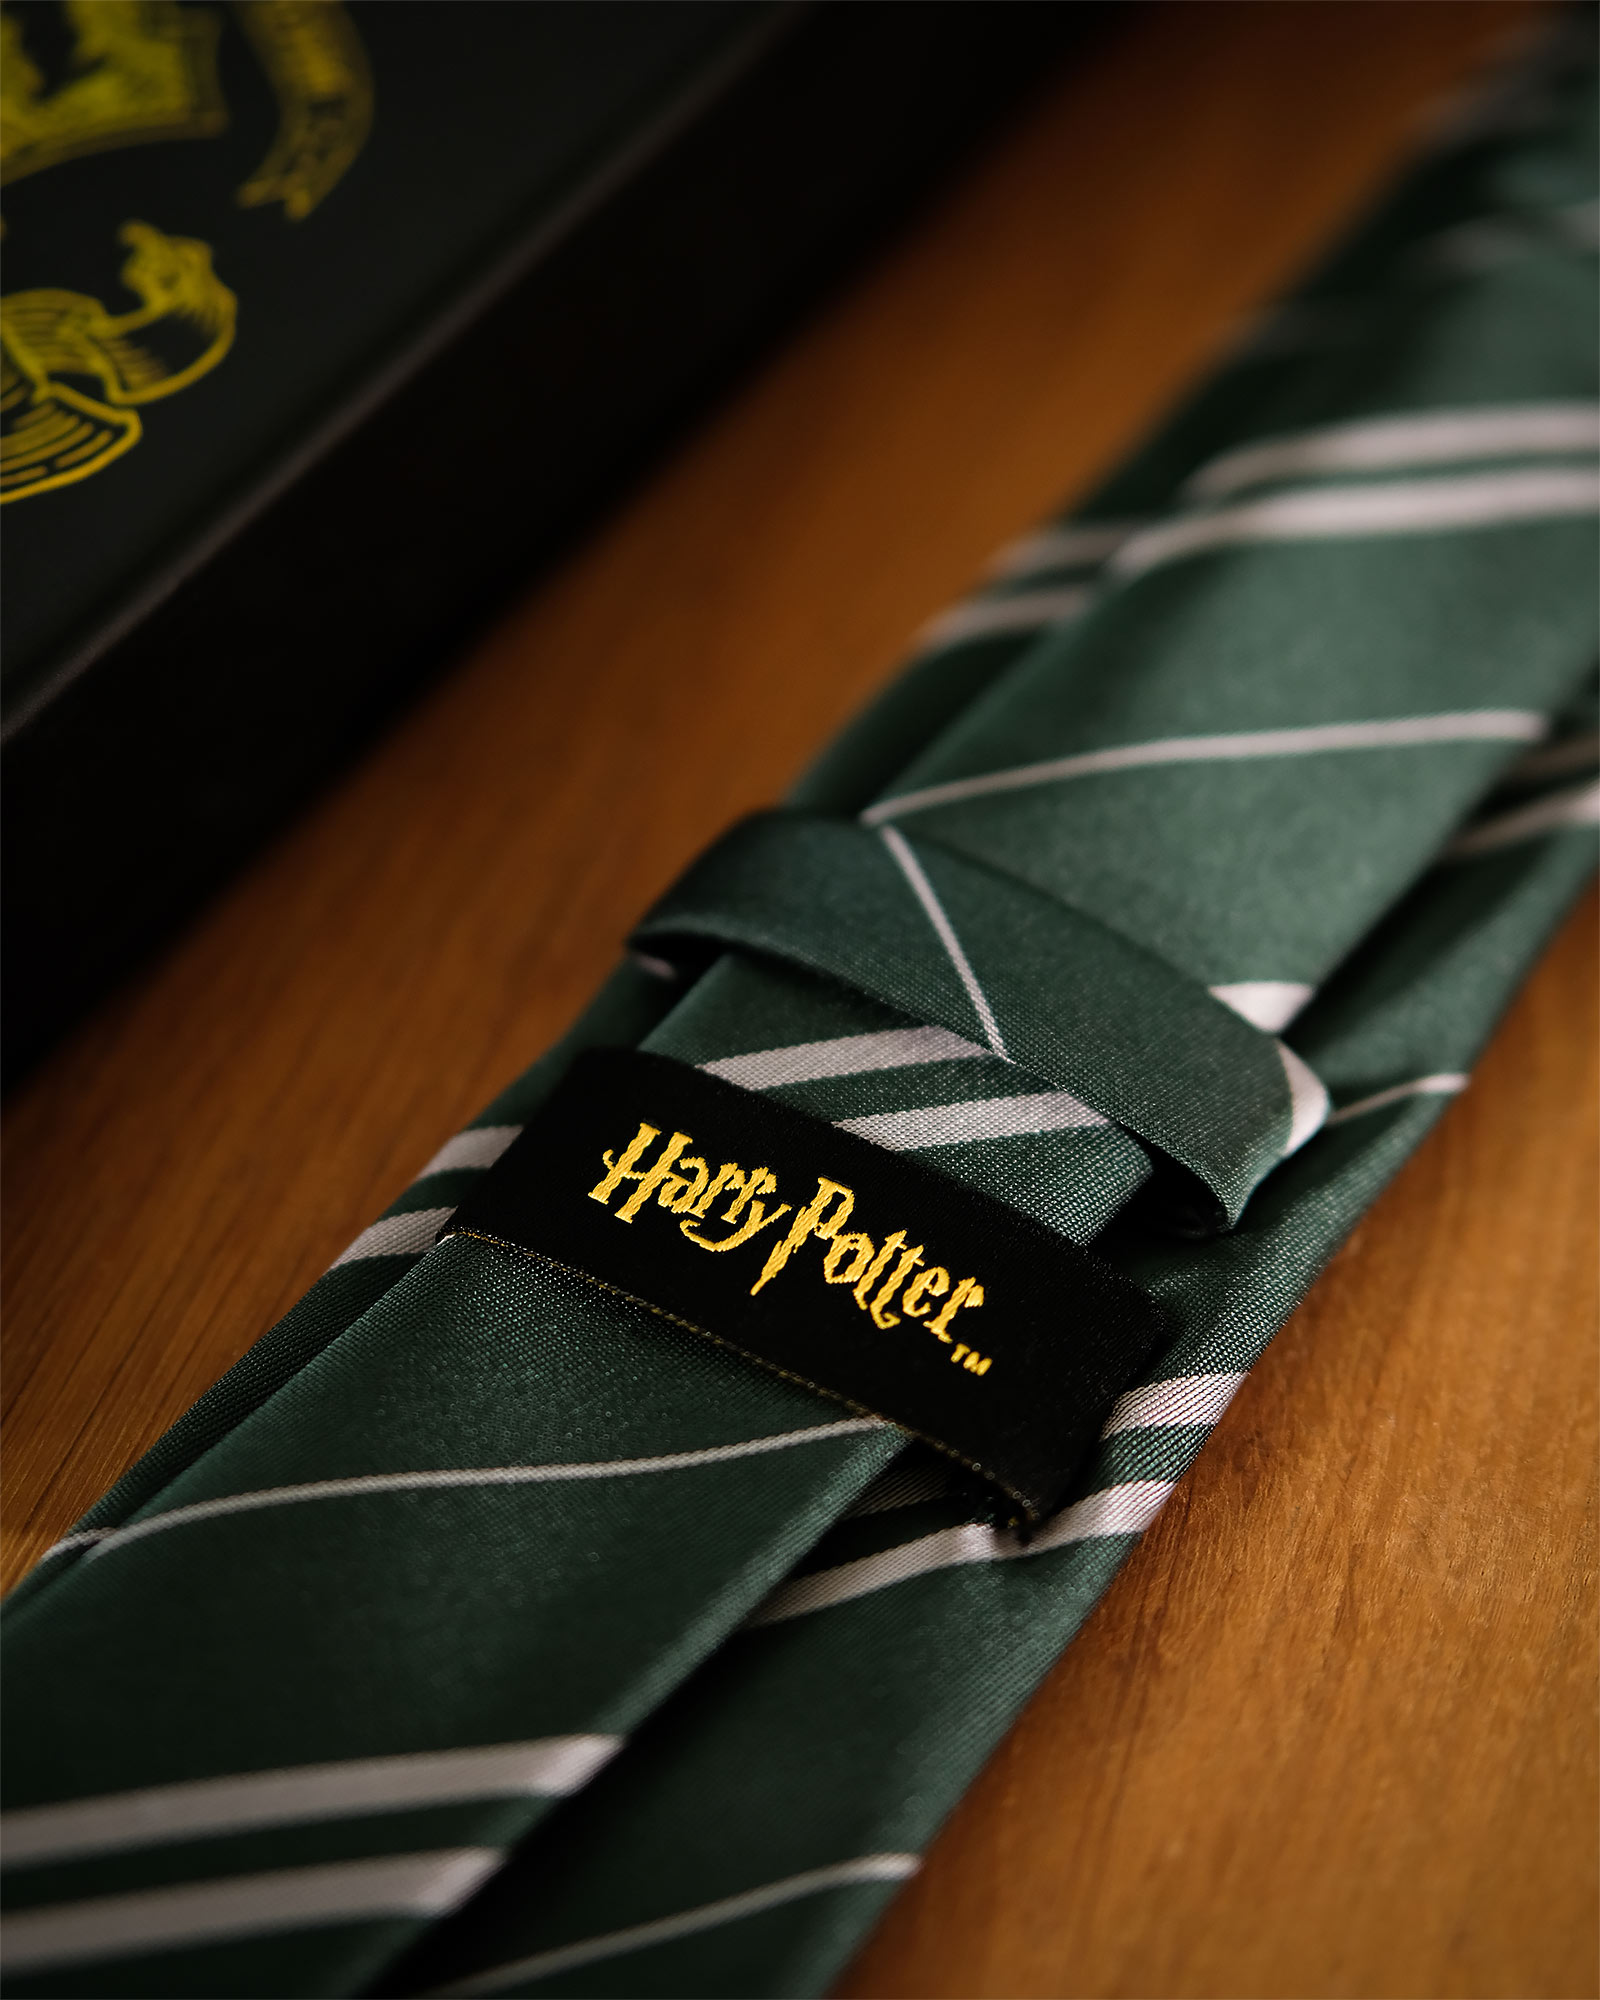 Harry Potter - Slytherin Tie with Gift Box